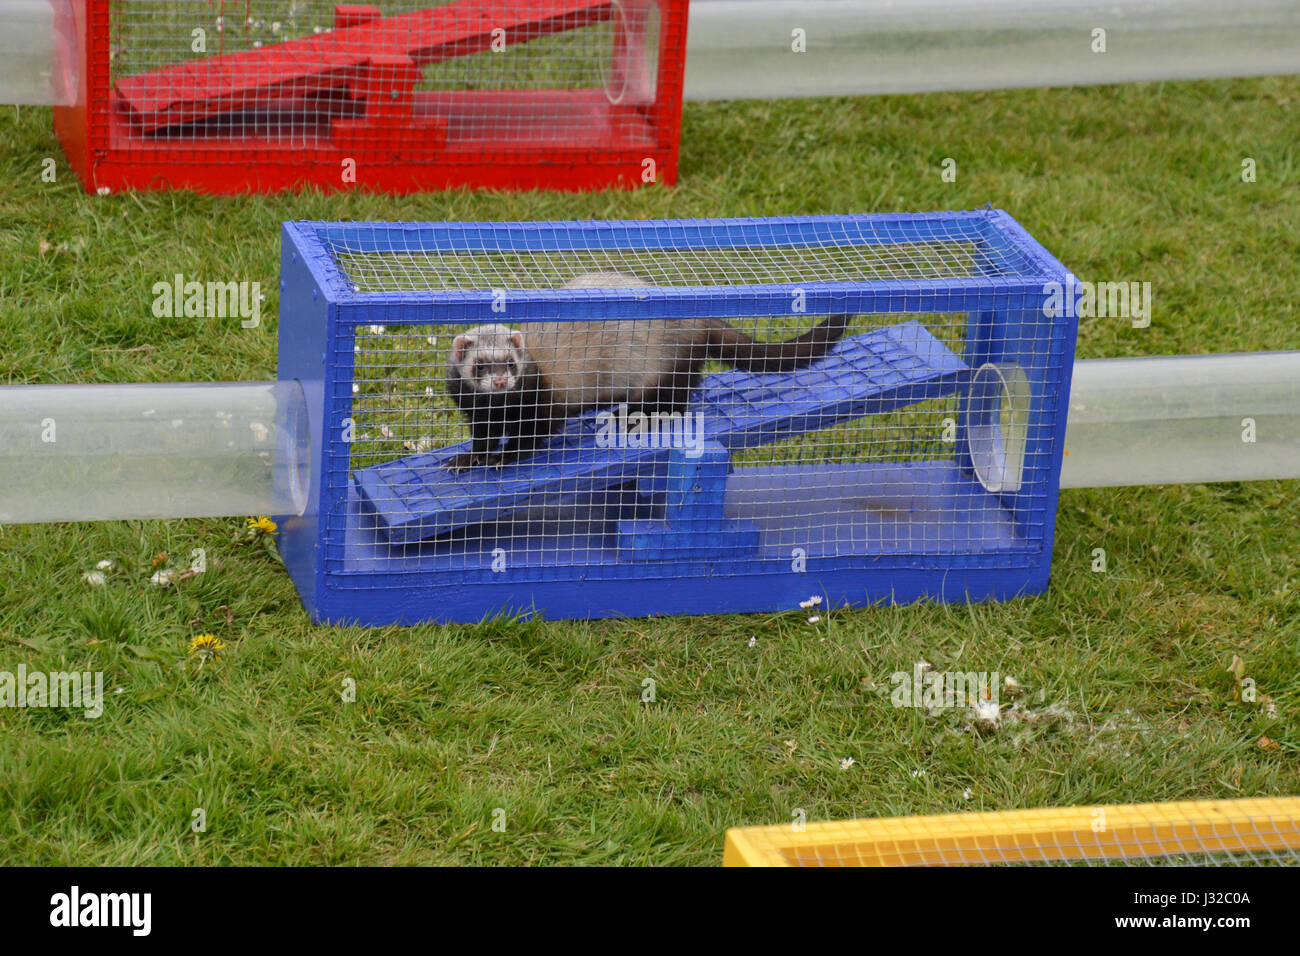 Ferret racing through tubes on an obstacle course, at the Longwick Village Fete, Buckinghamshire, UK Stock Photo